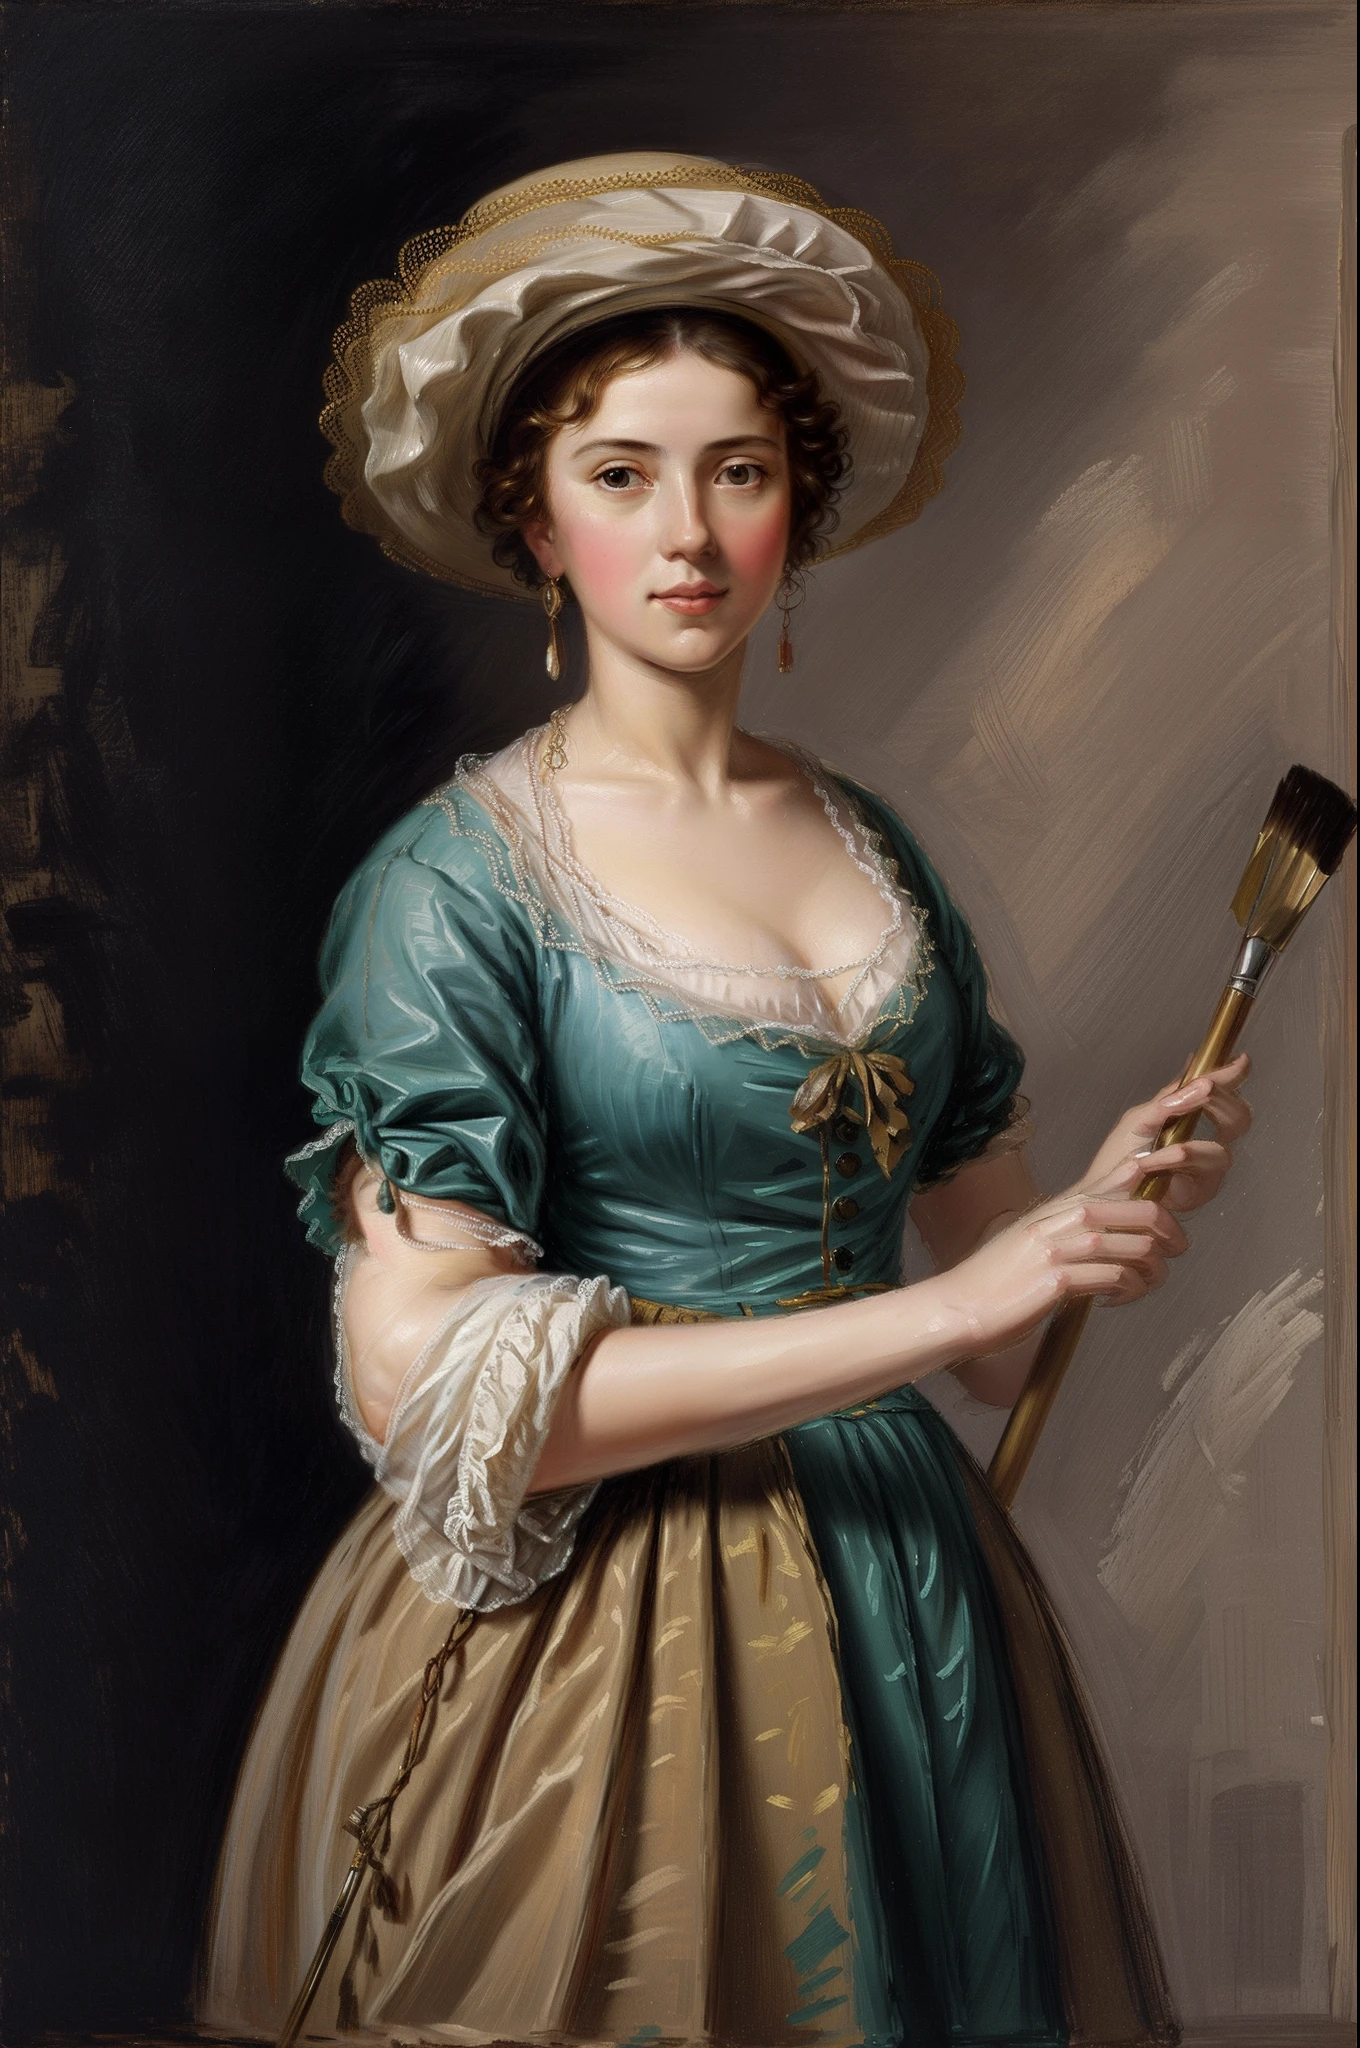 a painting of a woman in a hat holding a palette and a brush, inspired by Adélaïde Labille-Guiard, inspired by Élisabeth Vigée Le Brun, by Élisabeth Vigée Le Brun, adelaide labille - guiard, by Adélaïde Labille-Guiard